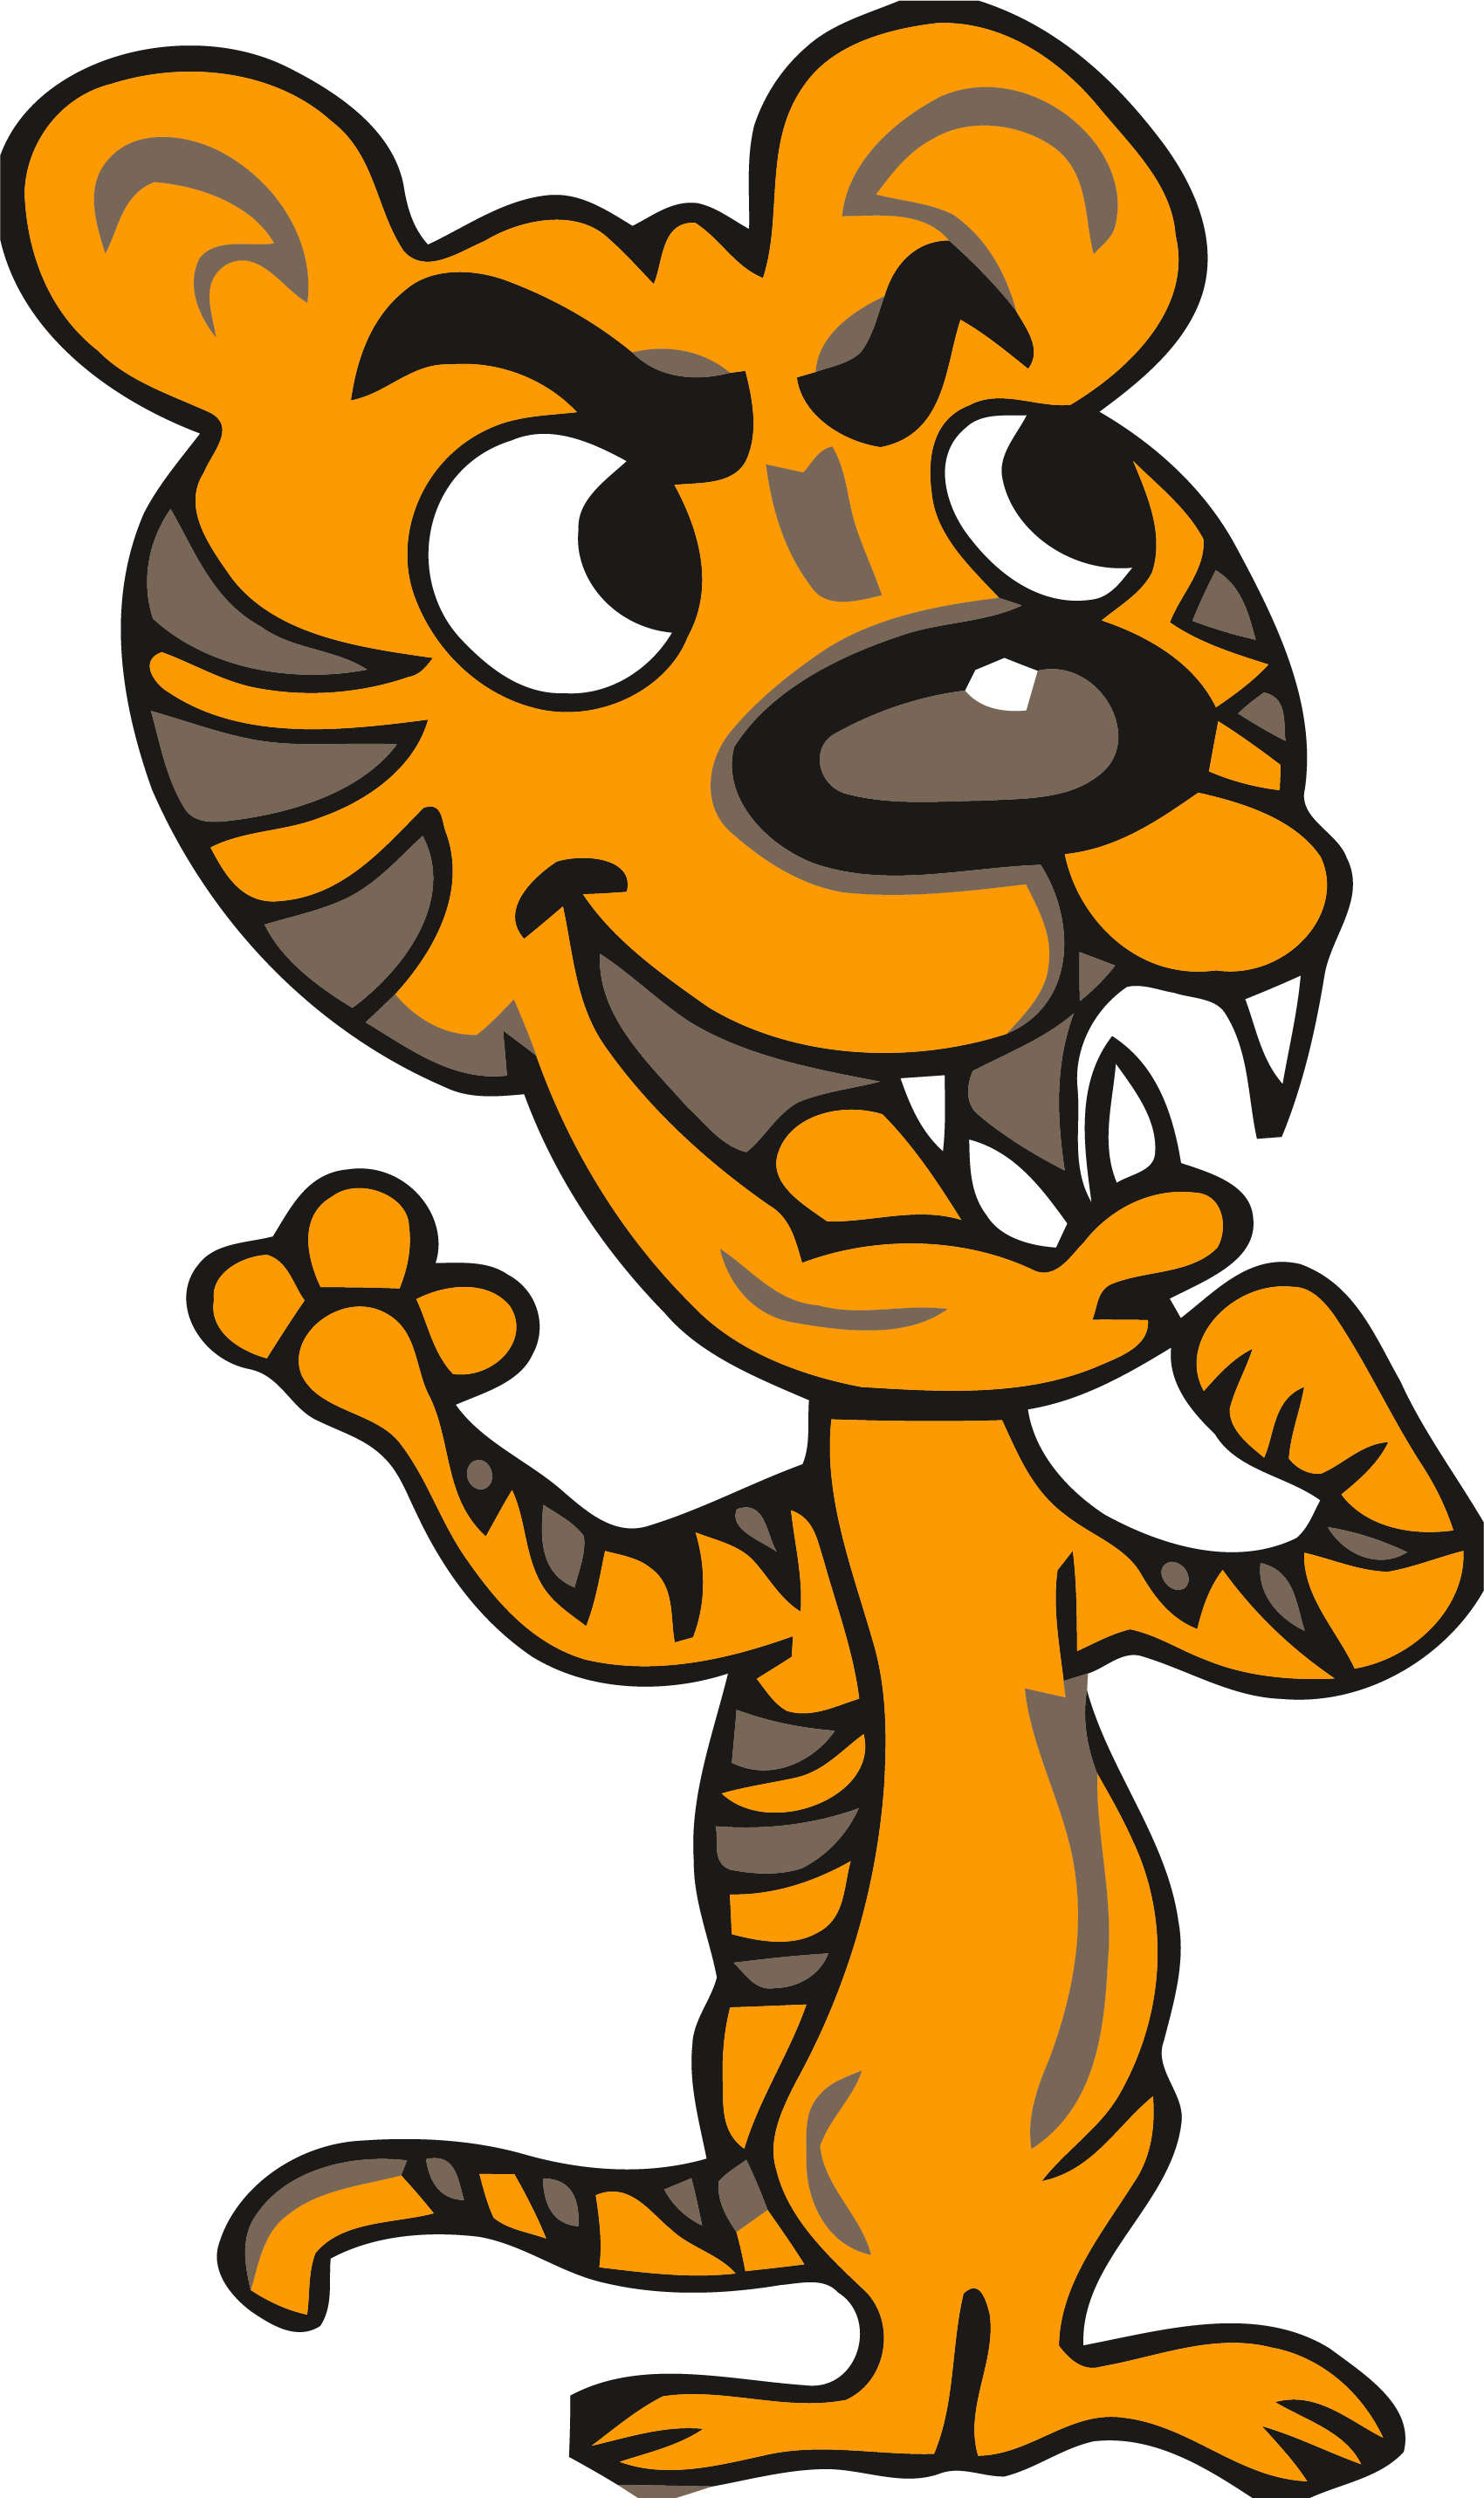 Thinking Tigger Clipart Png Image Download - 担心 卡通 (1700x2861), Png Download